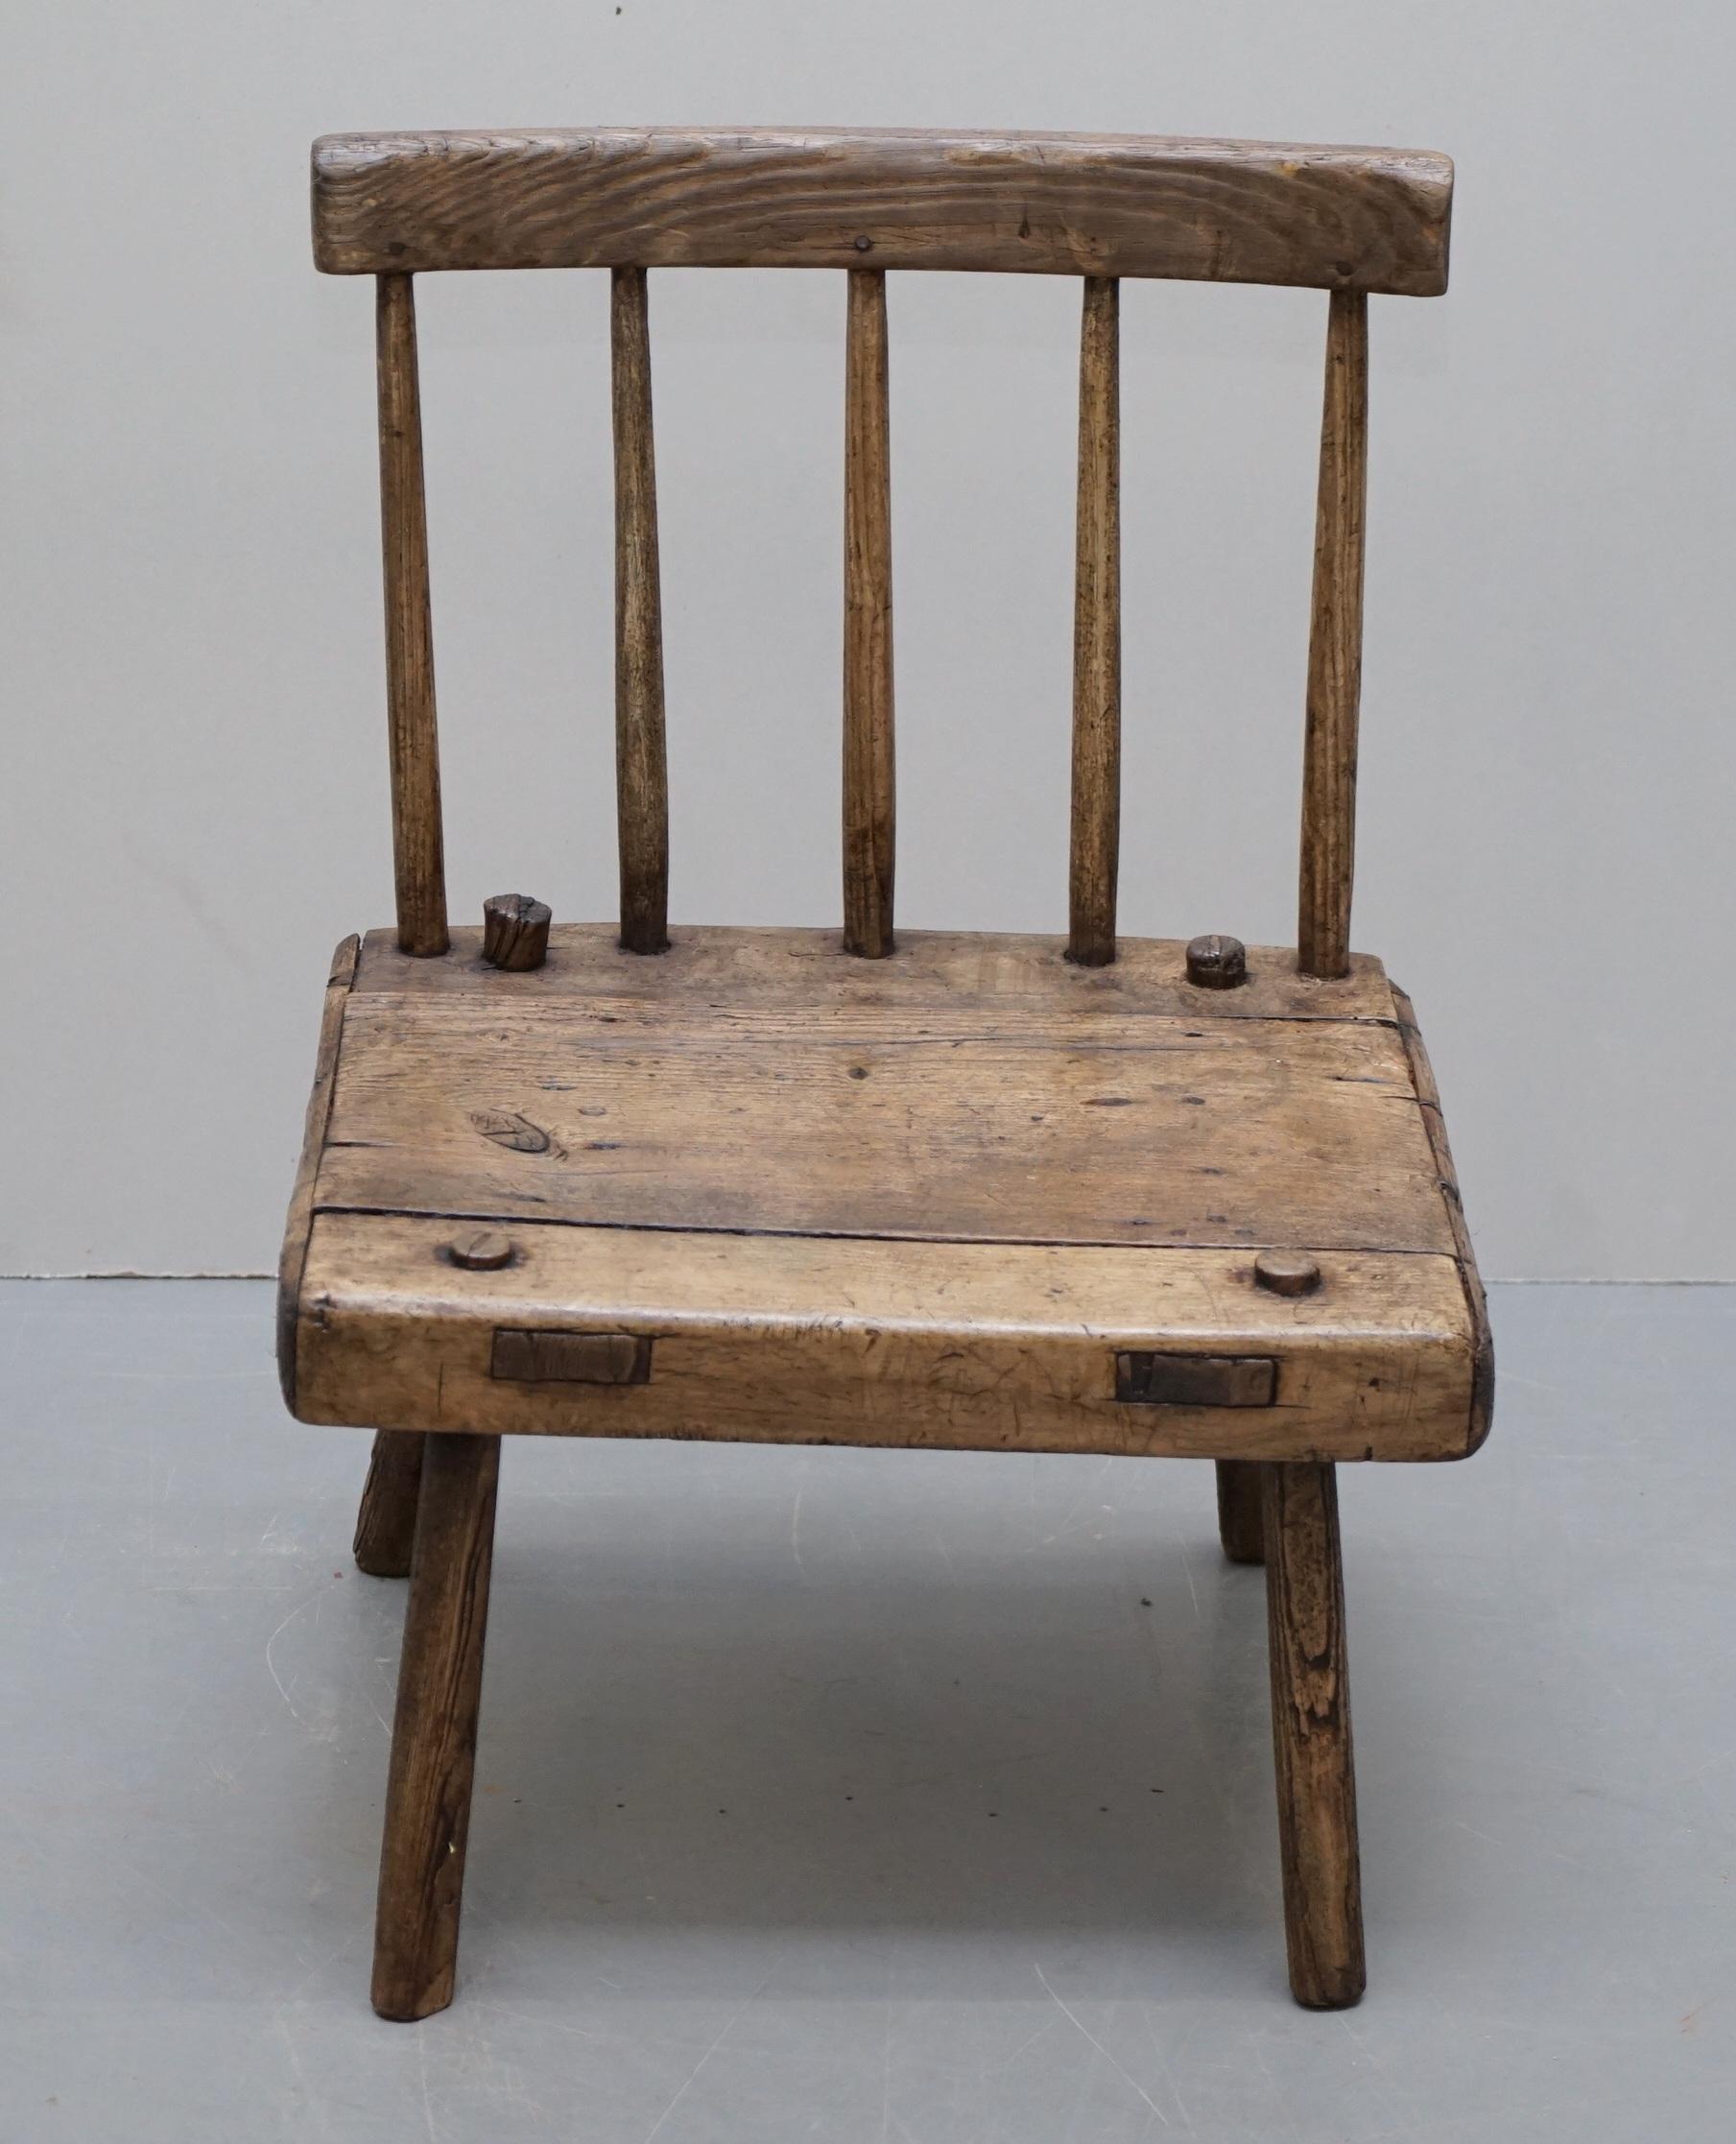 We are delighted to offer for sale this really quite lovely original circa 1820 Irish Famine chair in pine

A good looking and exceptionally decorative chair. All the timber is period correct and not replaced which is crazy for a 200+ year old